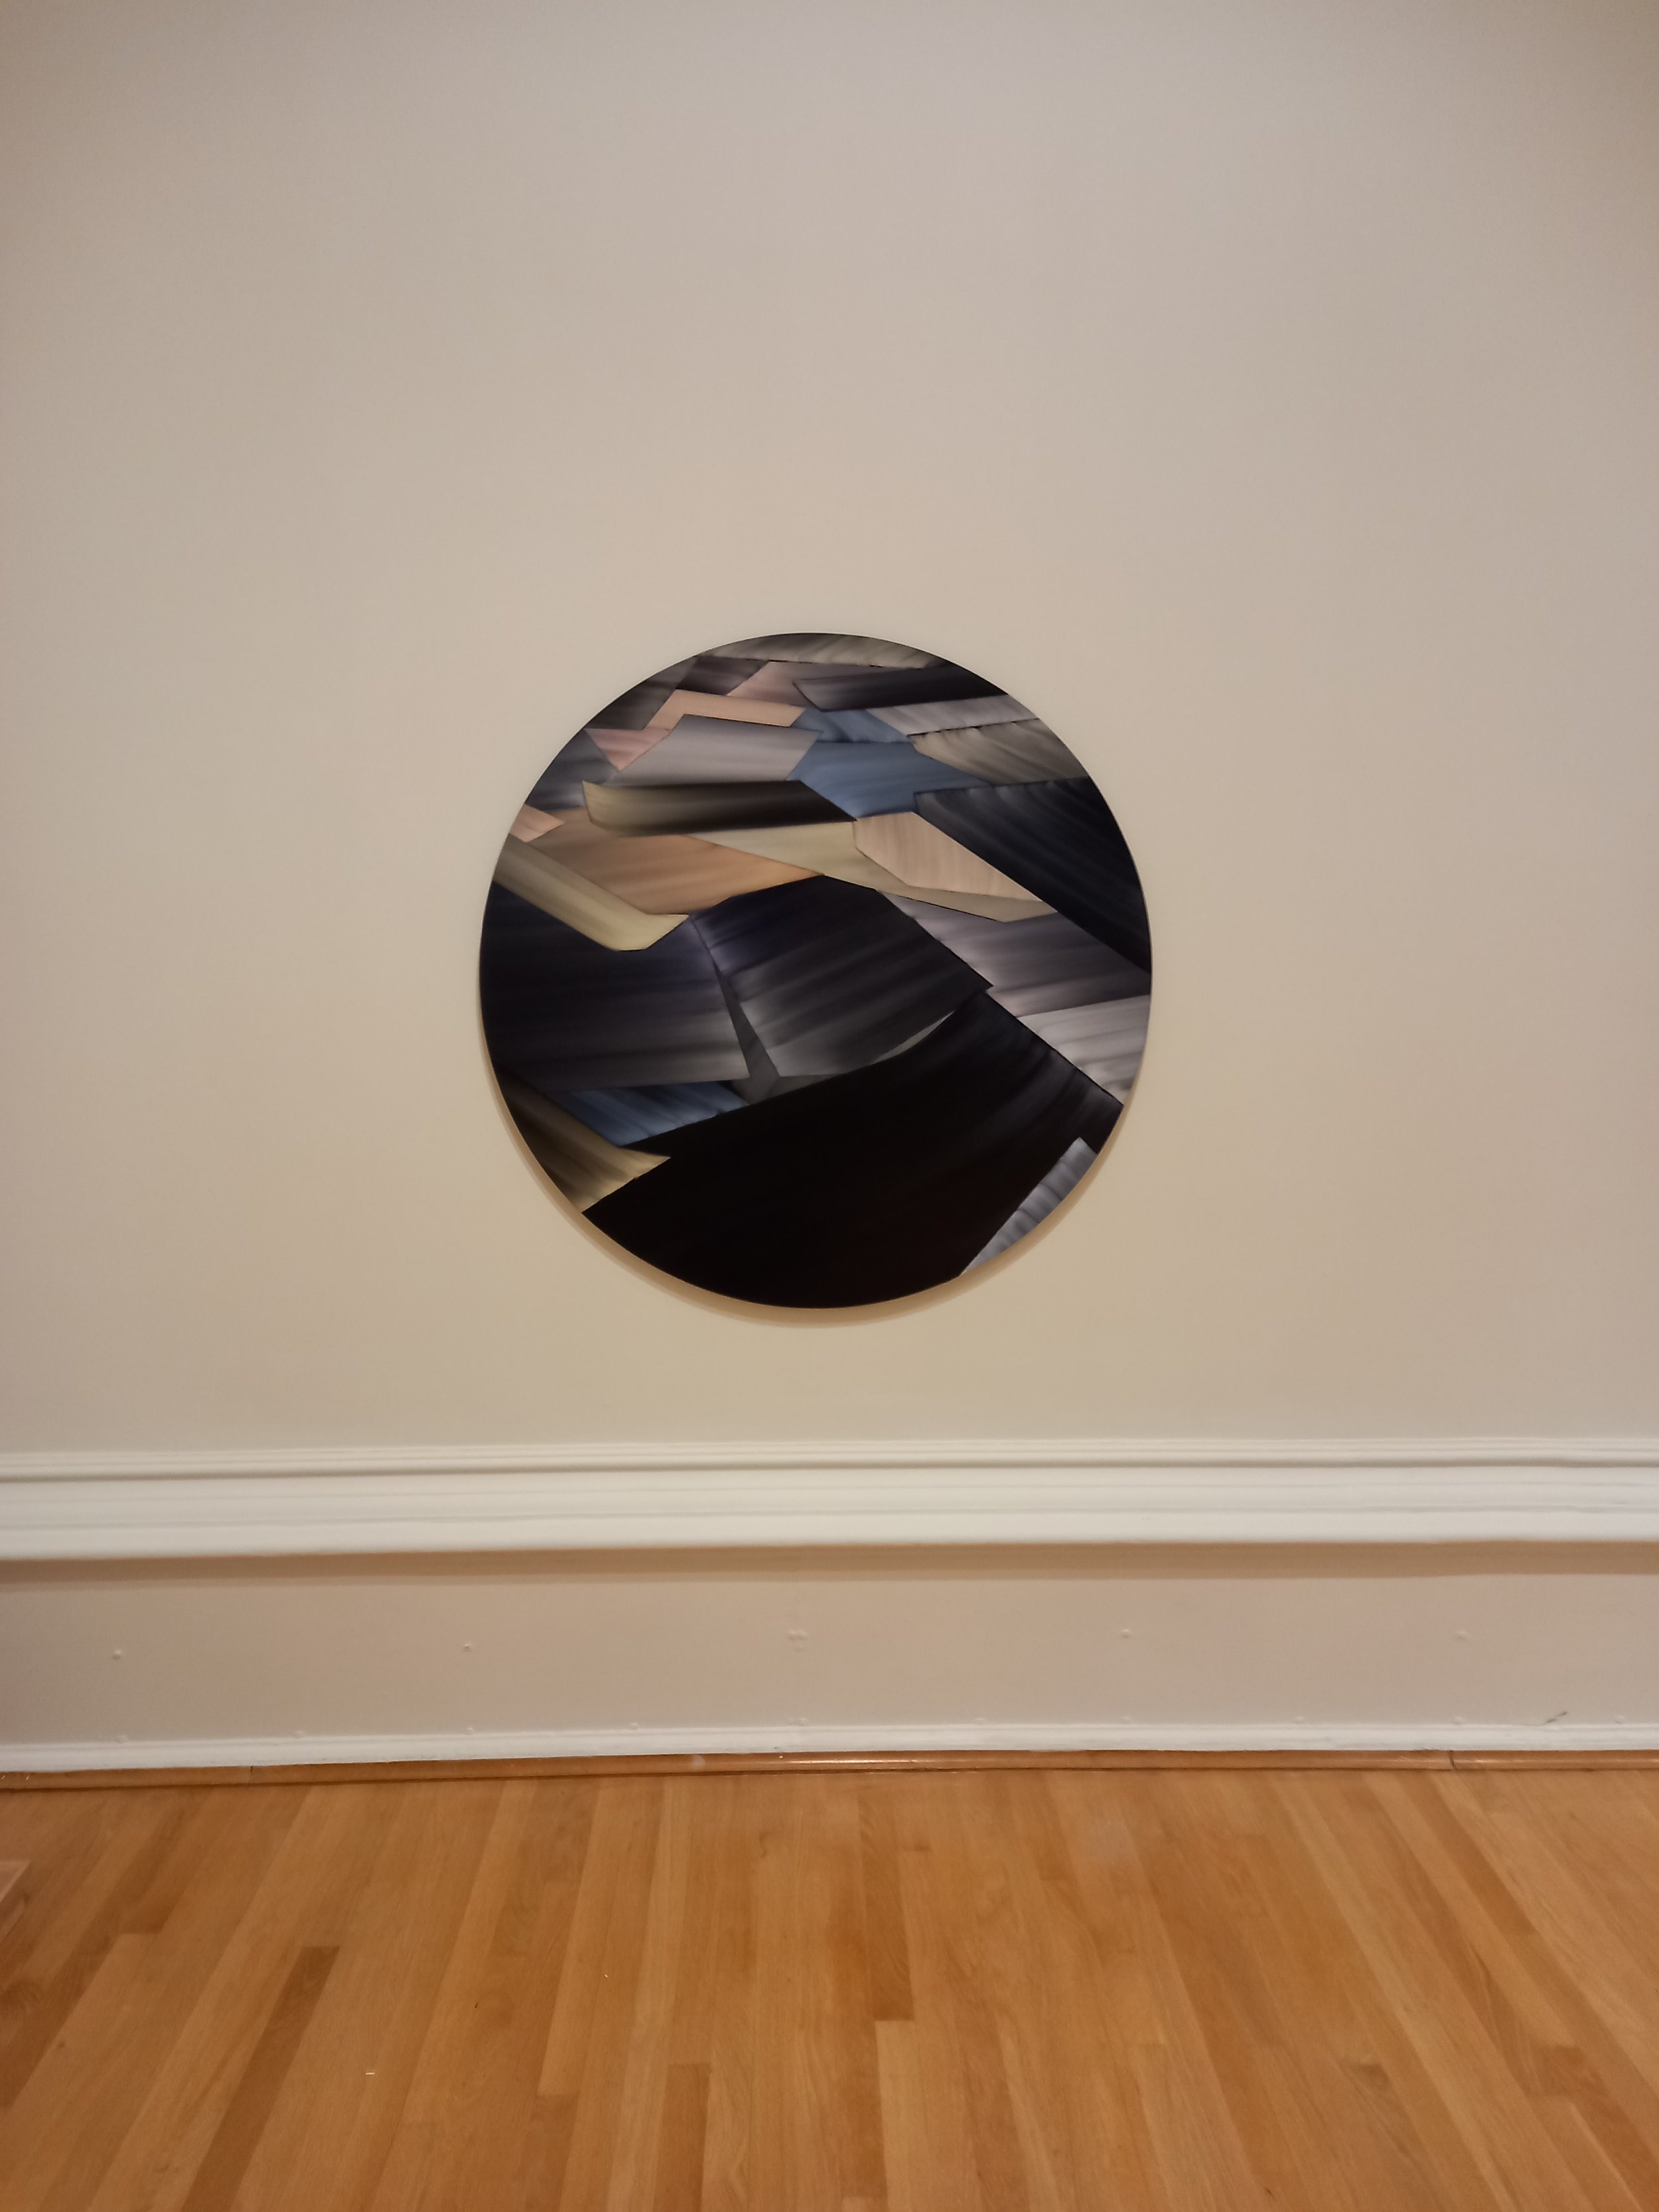 M. B. O’Toole, Untitled, Series III, painting no 2, oil on board, 120cm diameter, 2021.